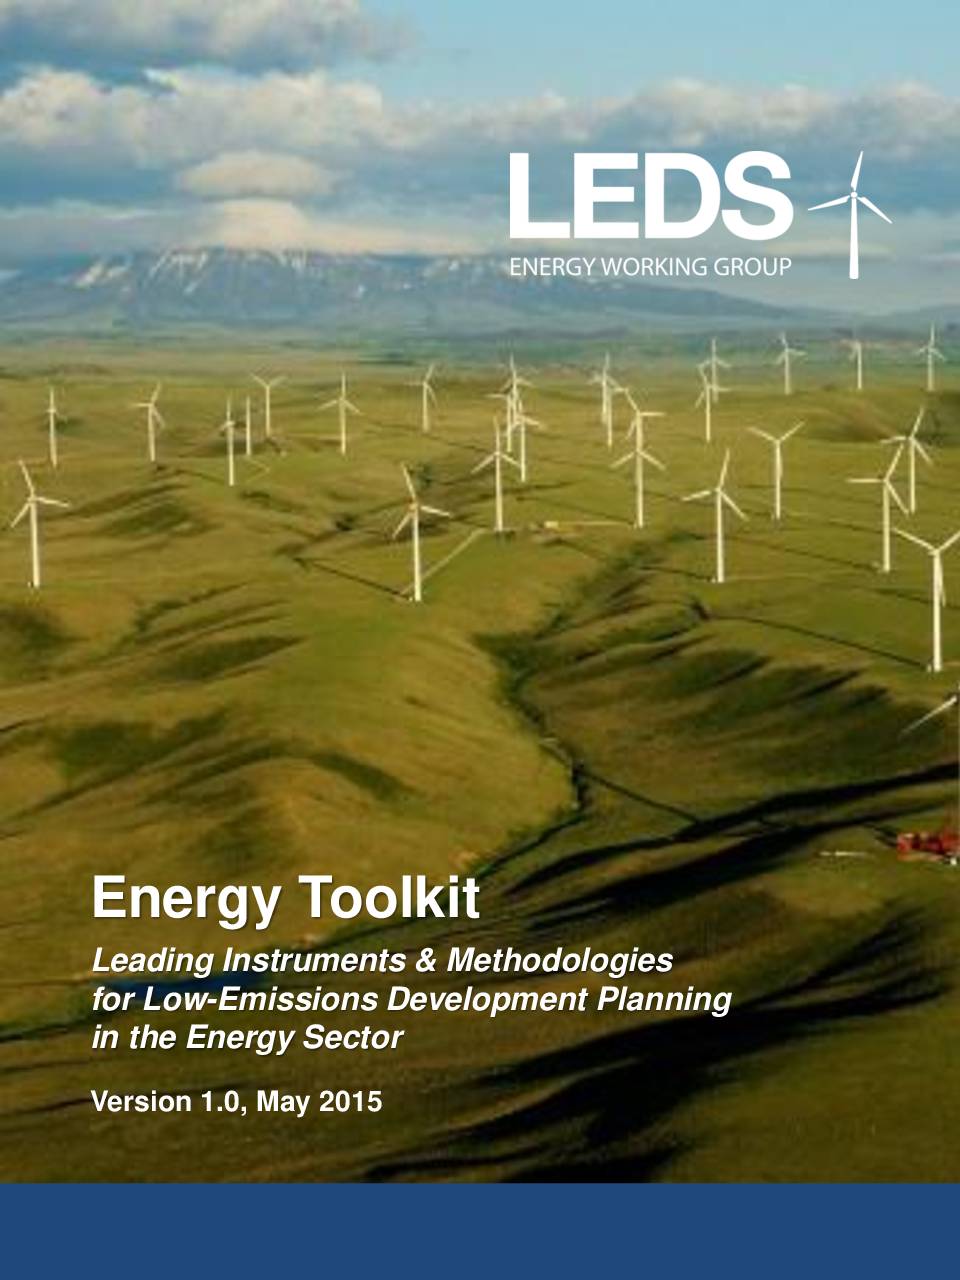 Energy Toolkit: Leading Instruments & Methodologies for Low-Emissions Development Planning in the Energy Sector